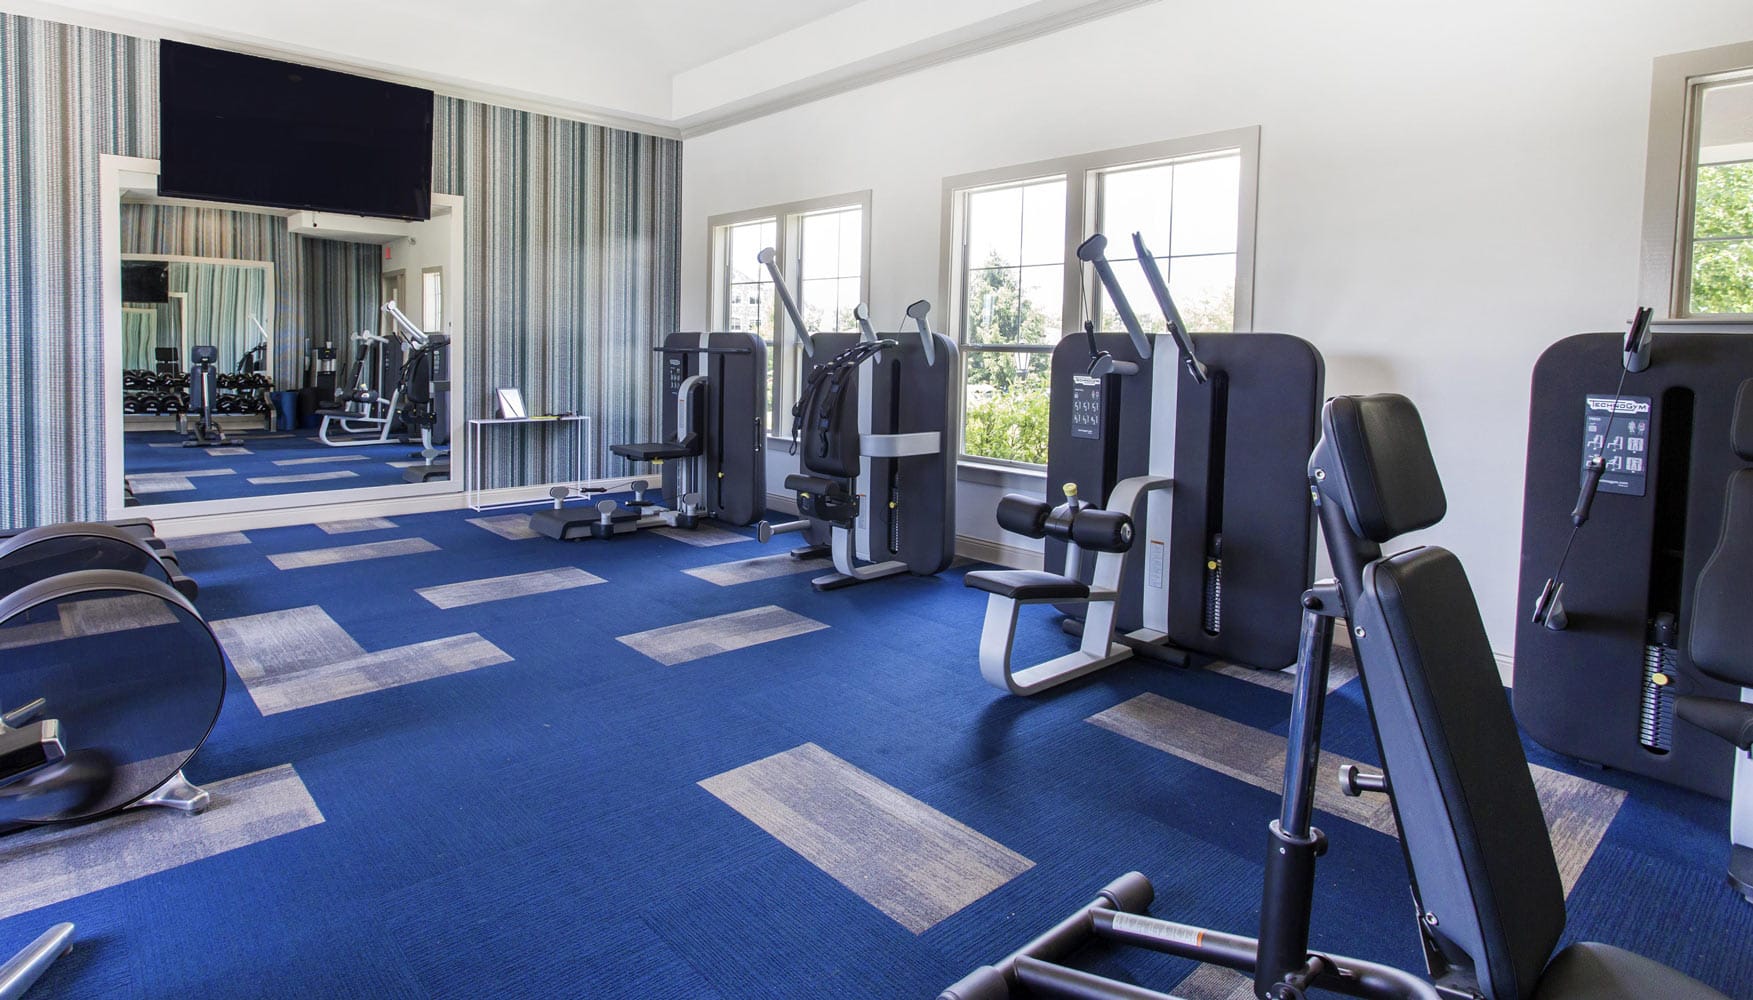 Gym interiors by Annette Jaffe in Jefferson at Westtown apartment